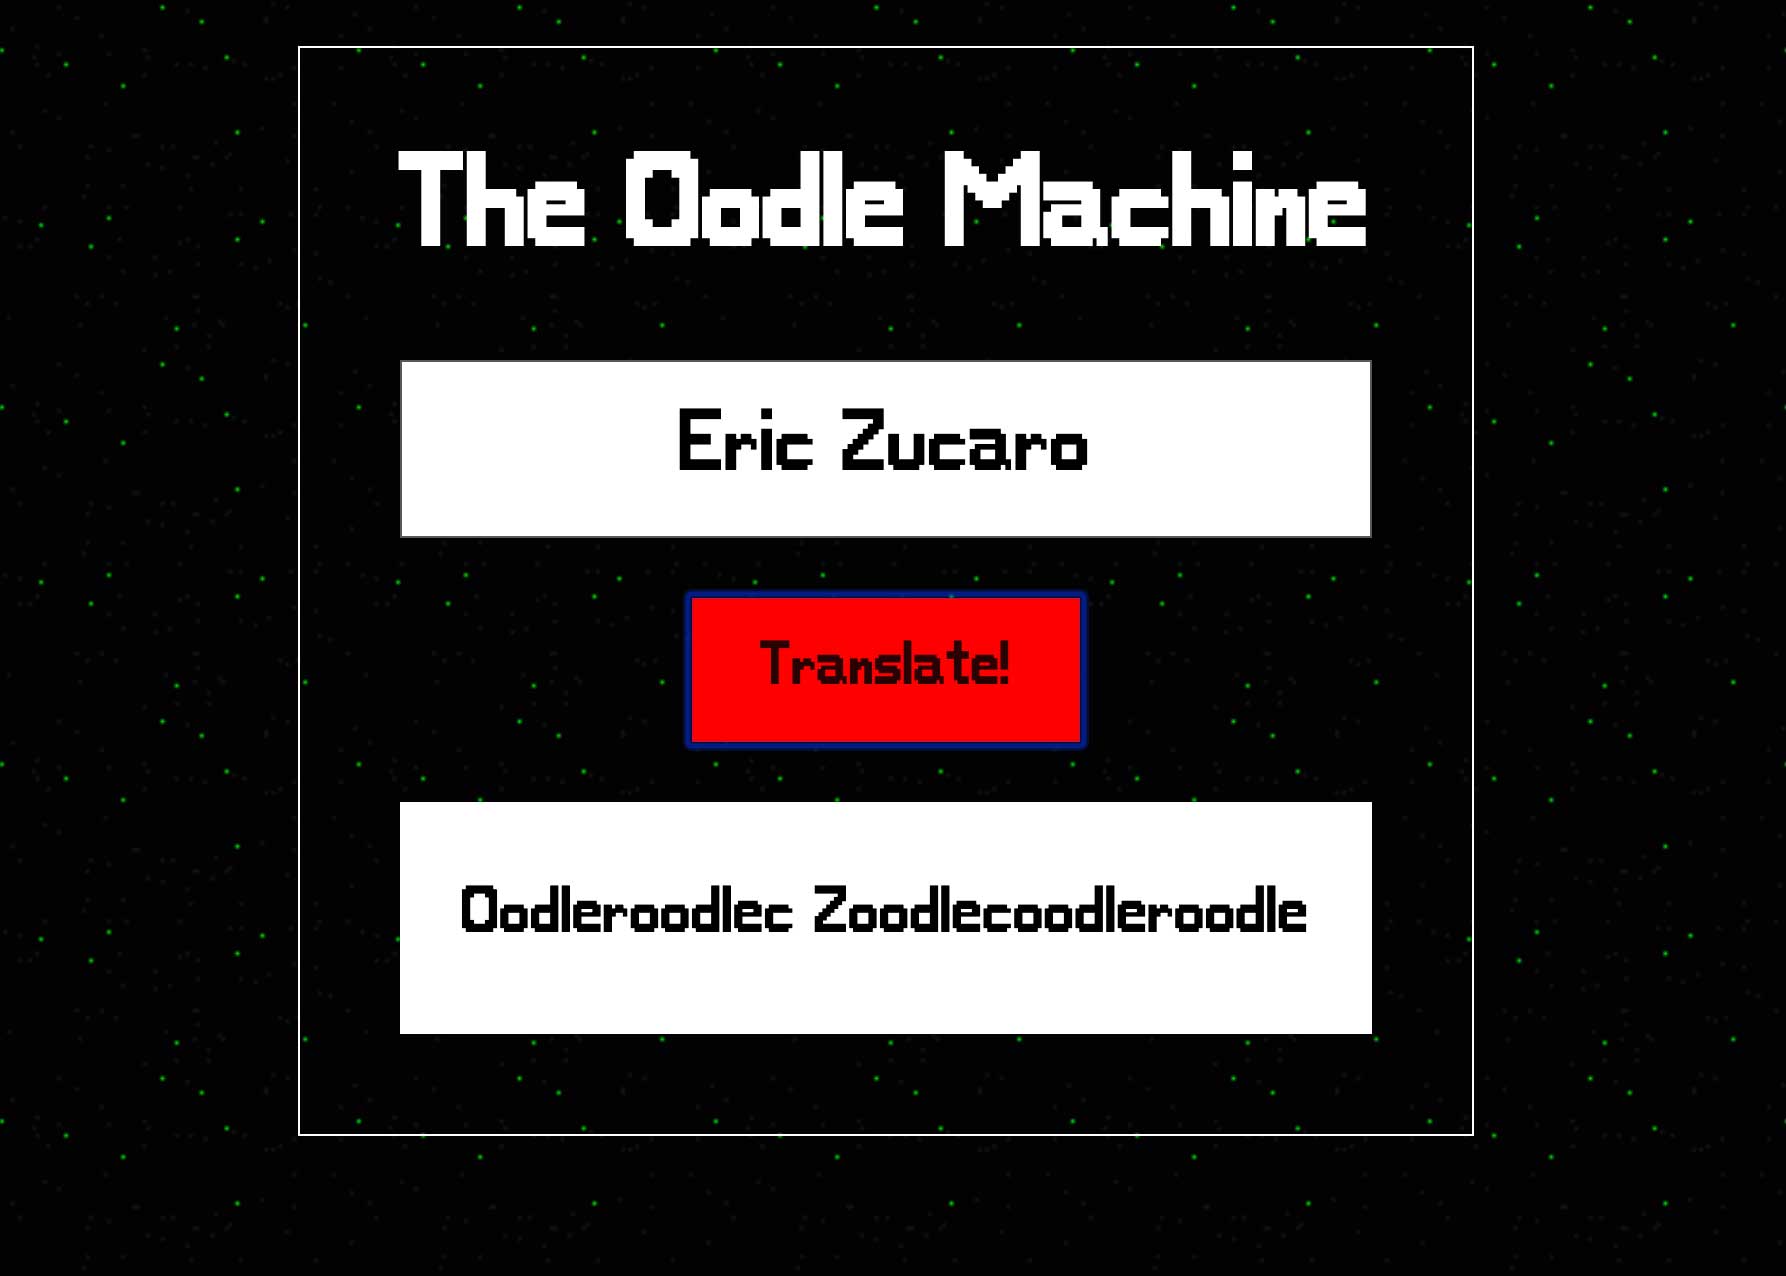 The Oodle Machine